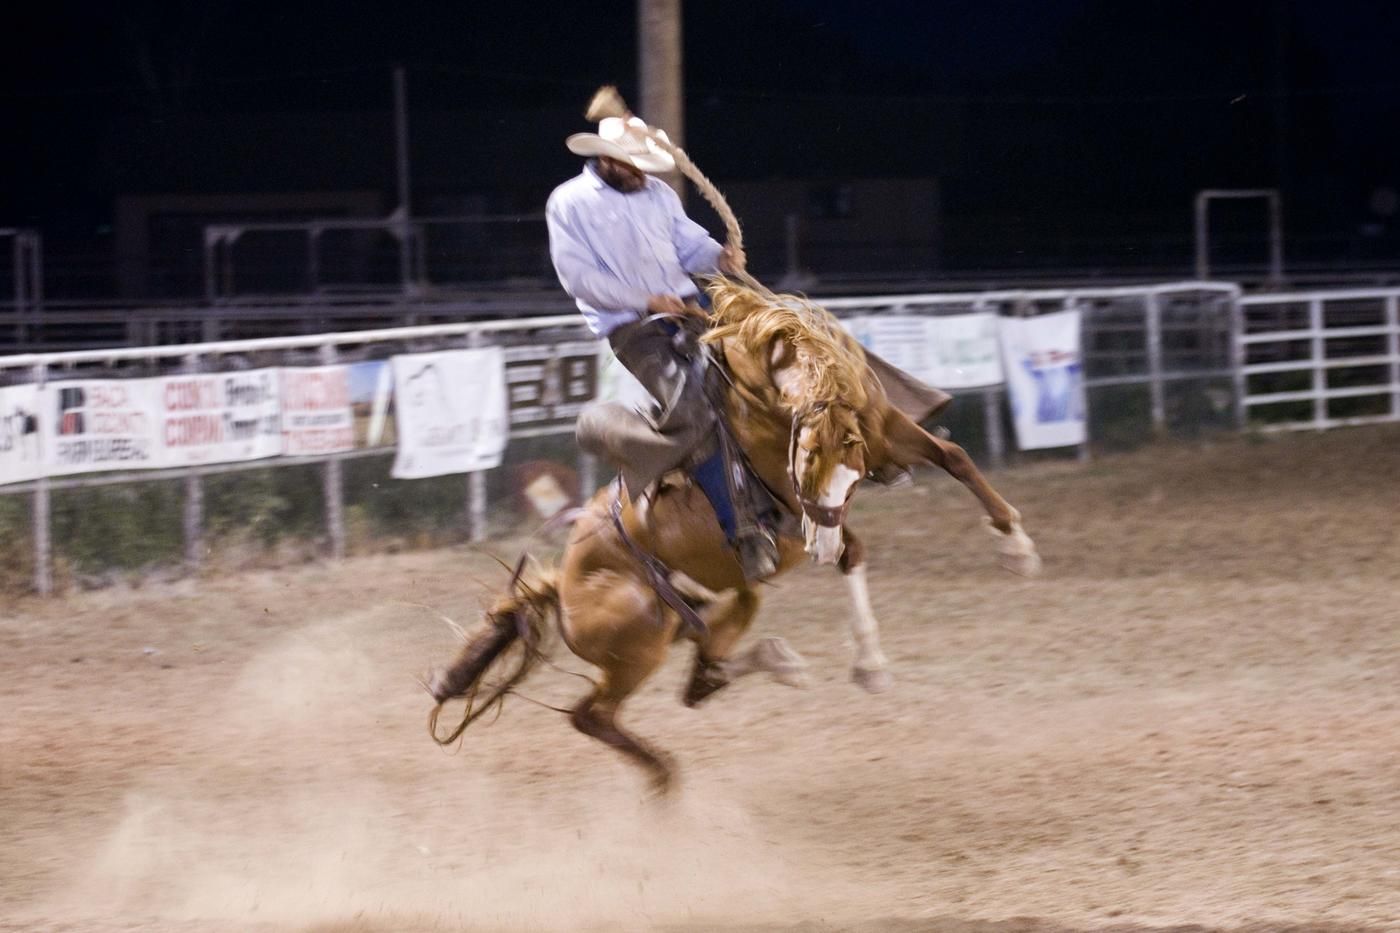 pro rodeo cowboy on horse jumping mid air